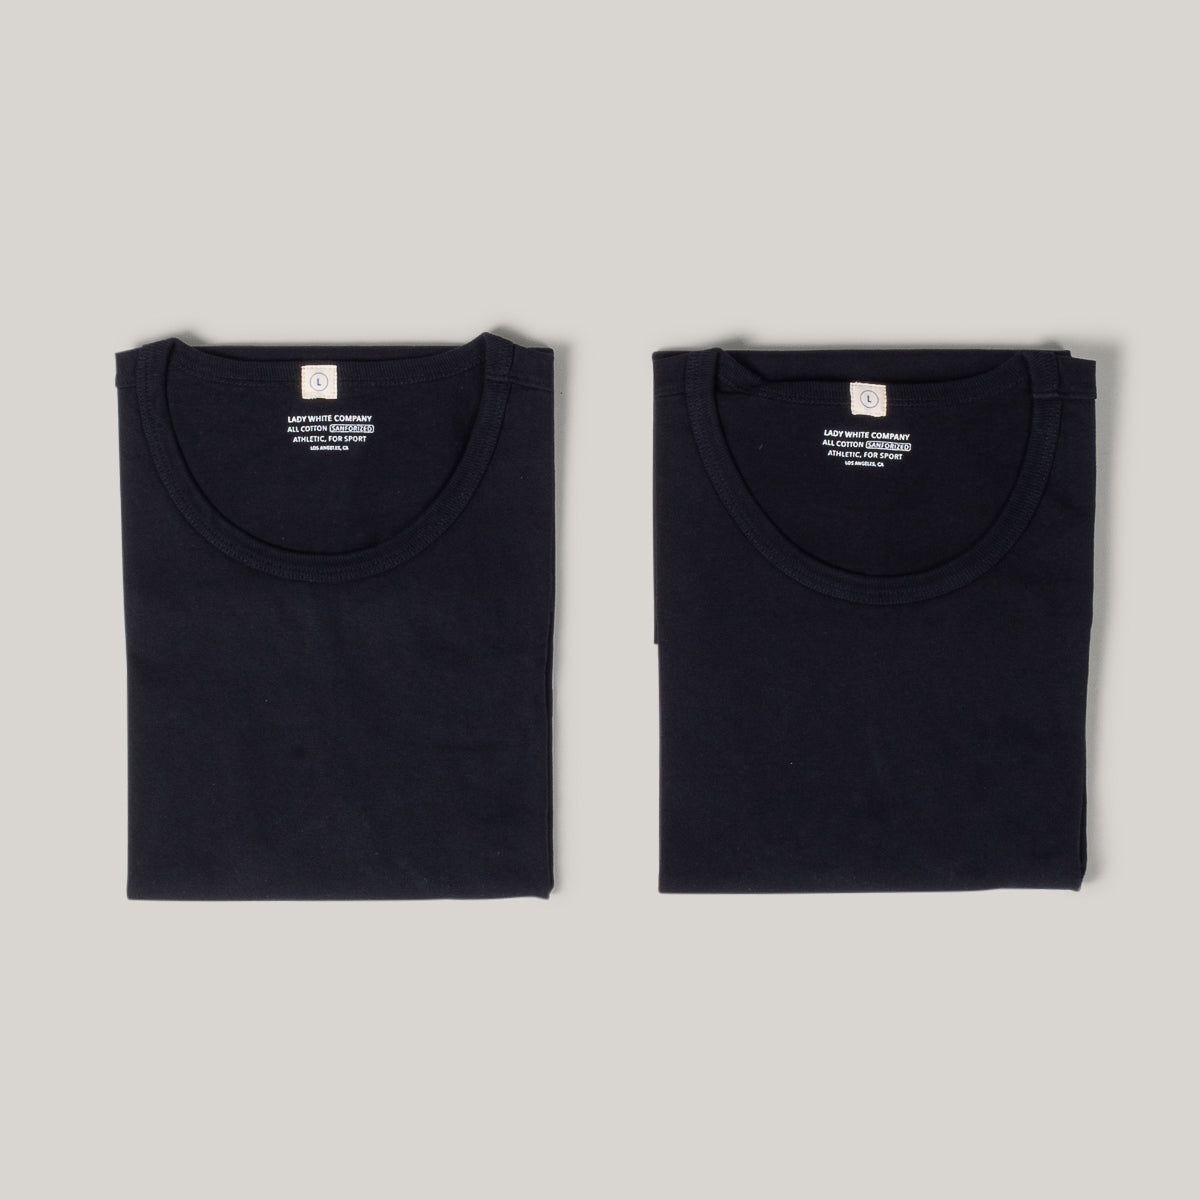 LADY WHITE CO. TEE 2 PACK - BLACK